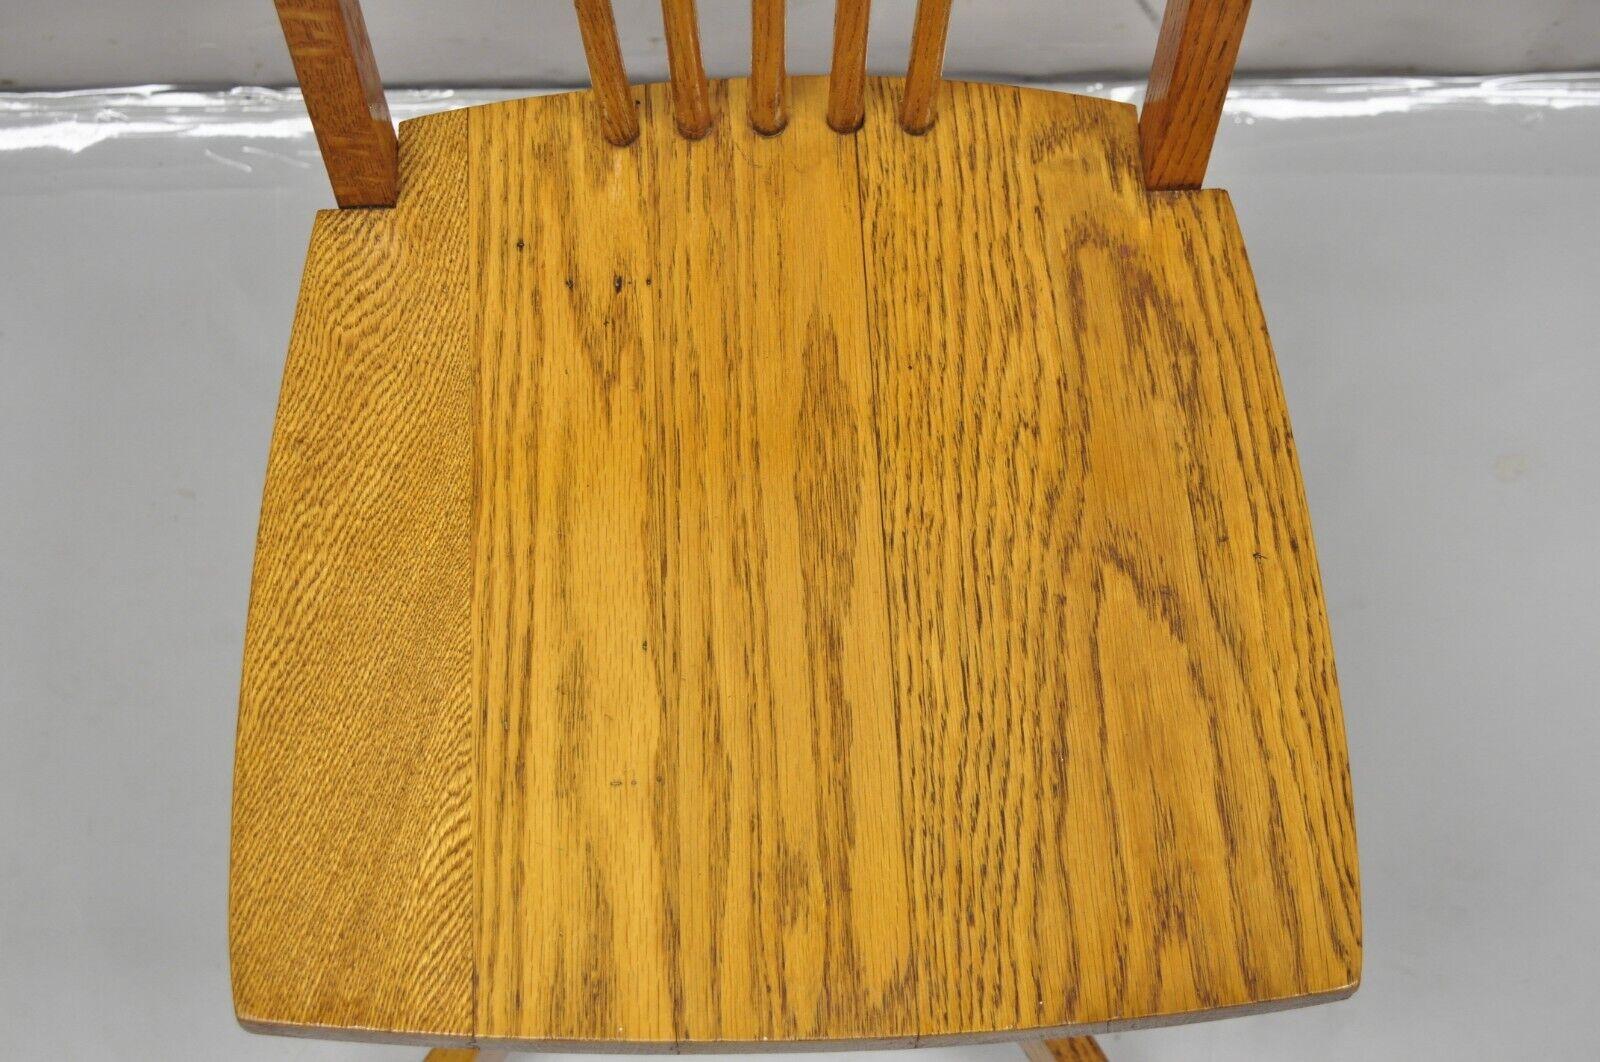 Vintage Mission Arts & Crafts Oak Wood Child’s School Desk Chair In Good Condition For Sale In Philadelphia, PA